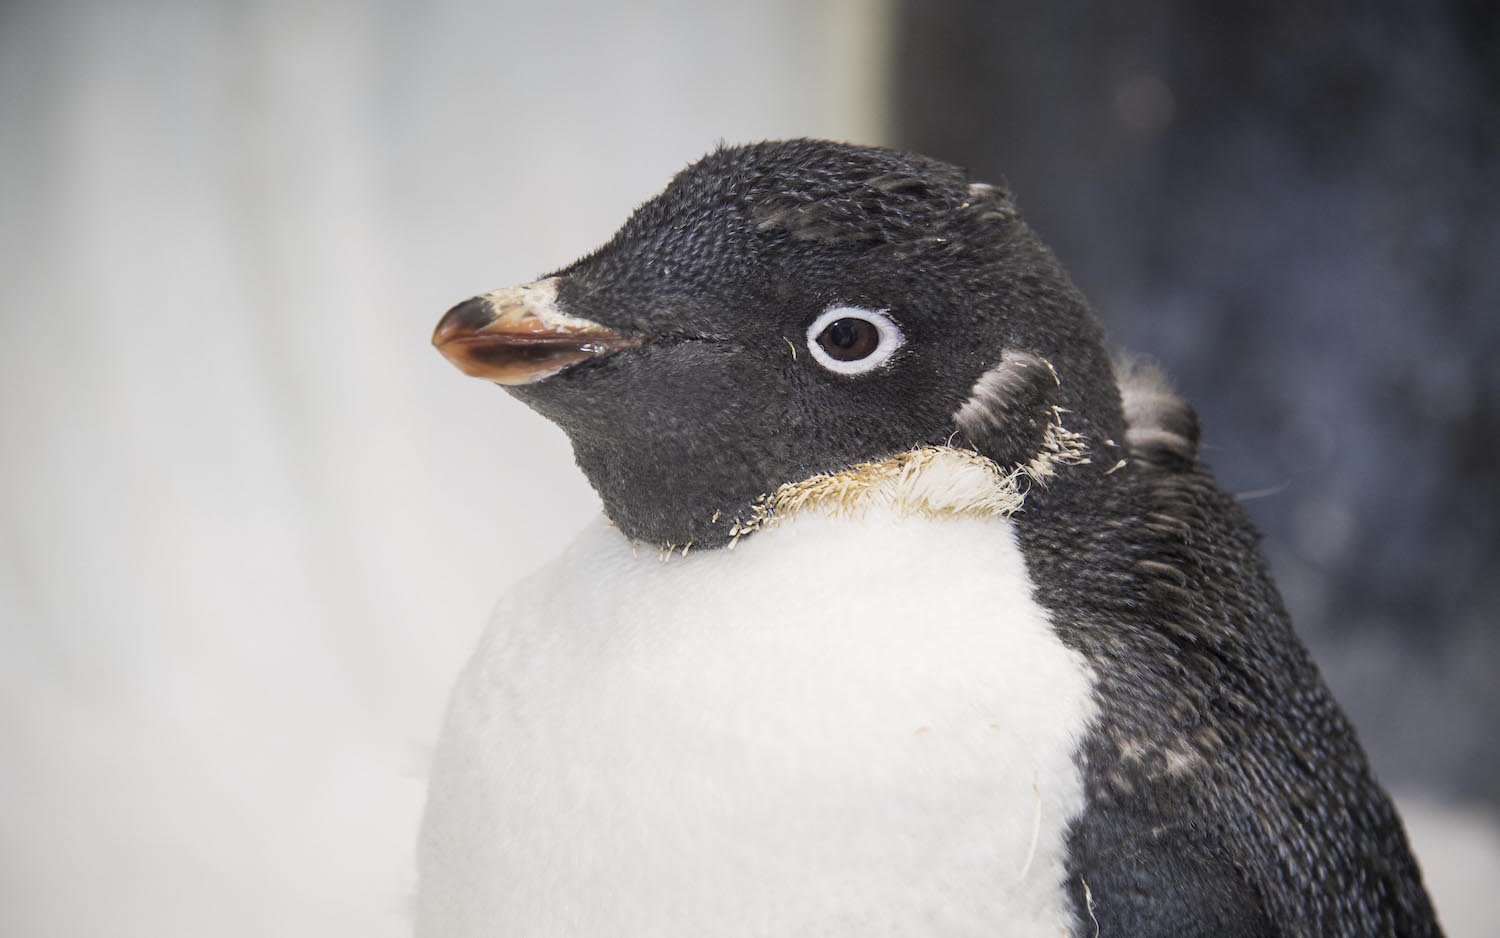 Wetsuit Penguin Starts the Year with New Feathers at SeaWorld